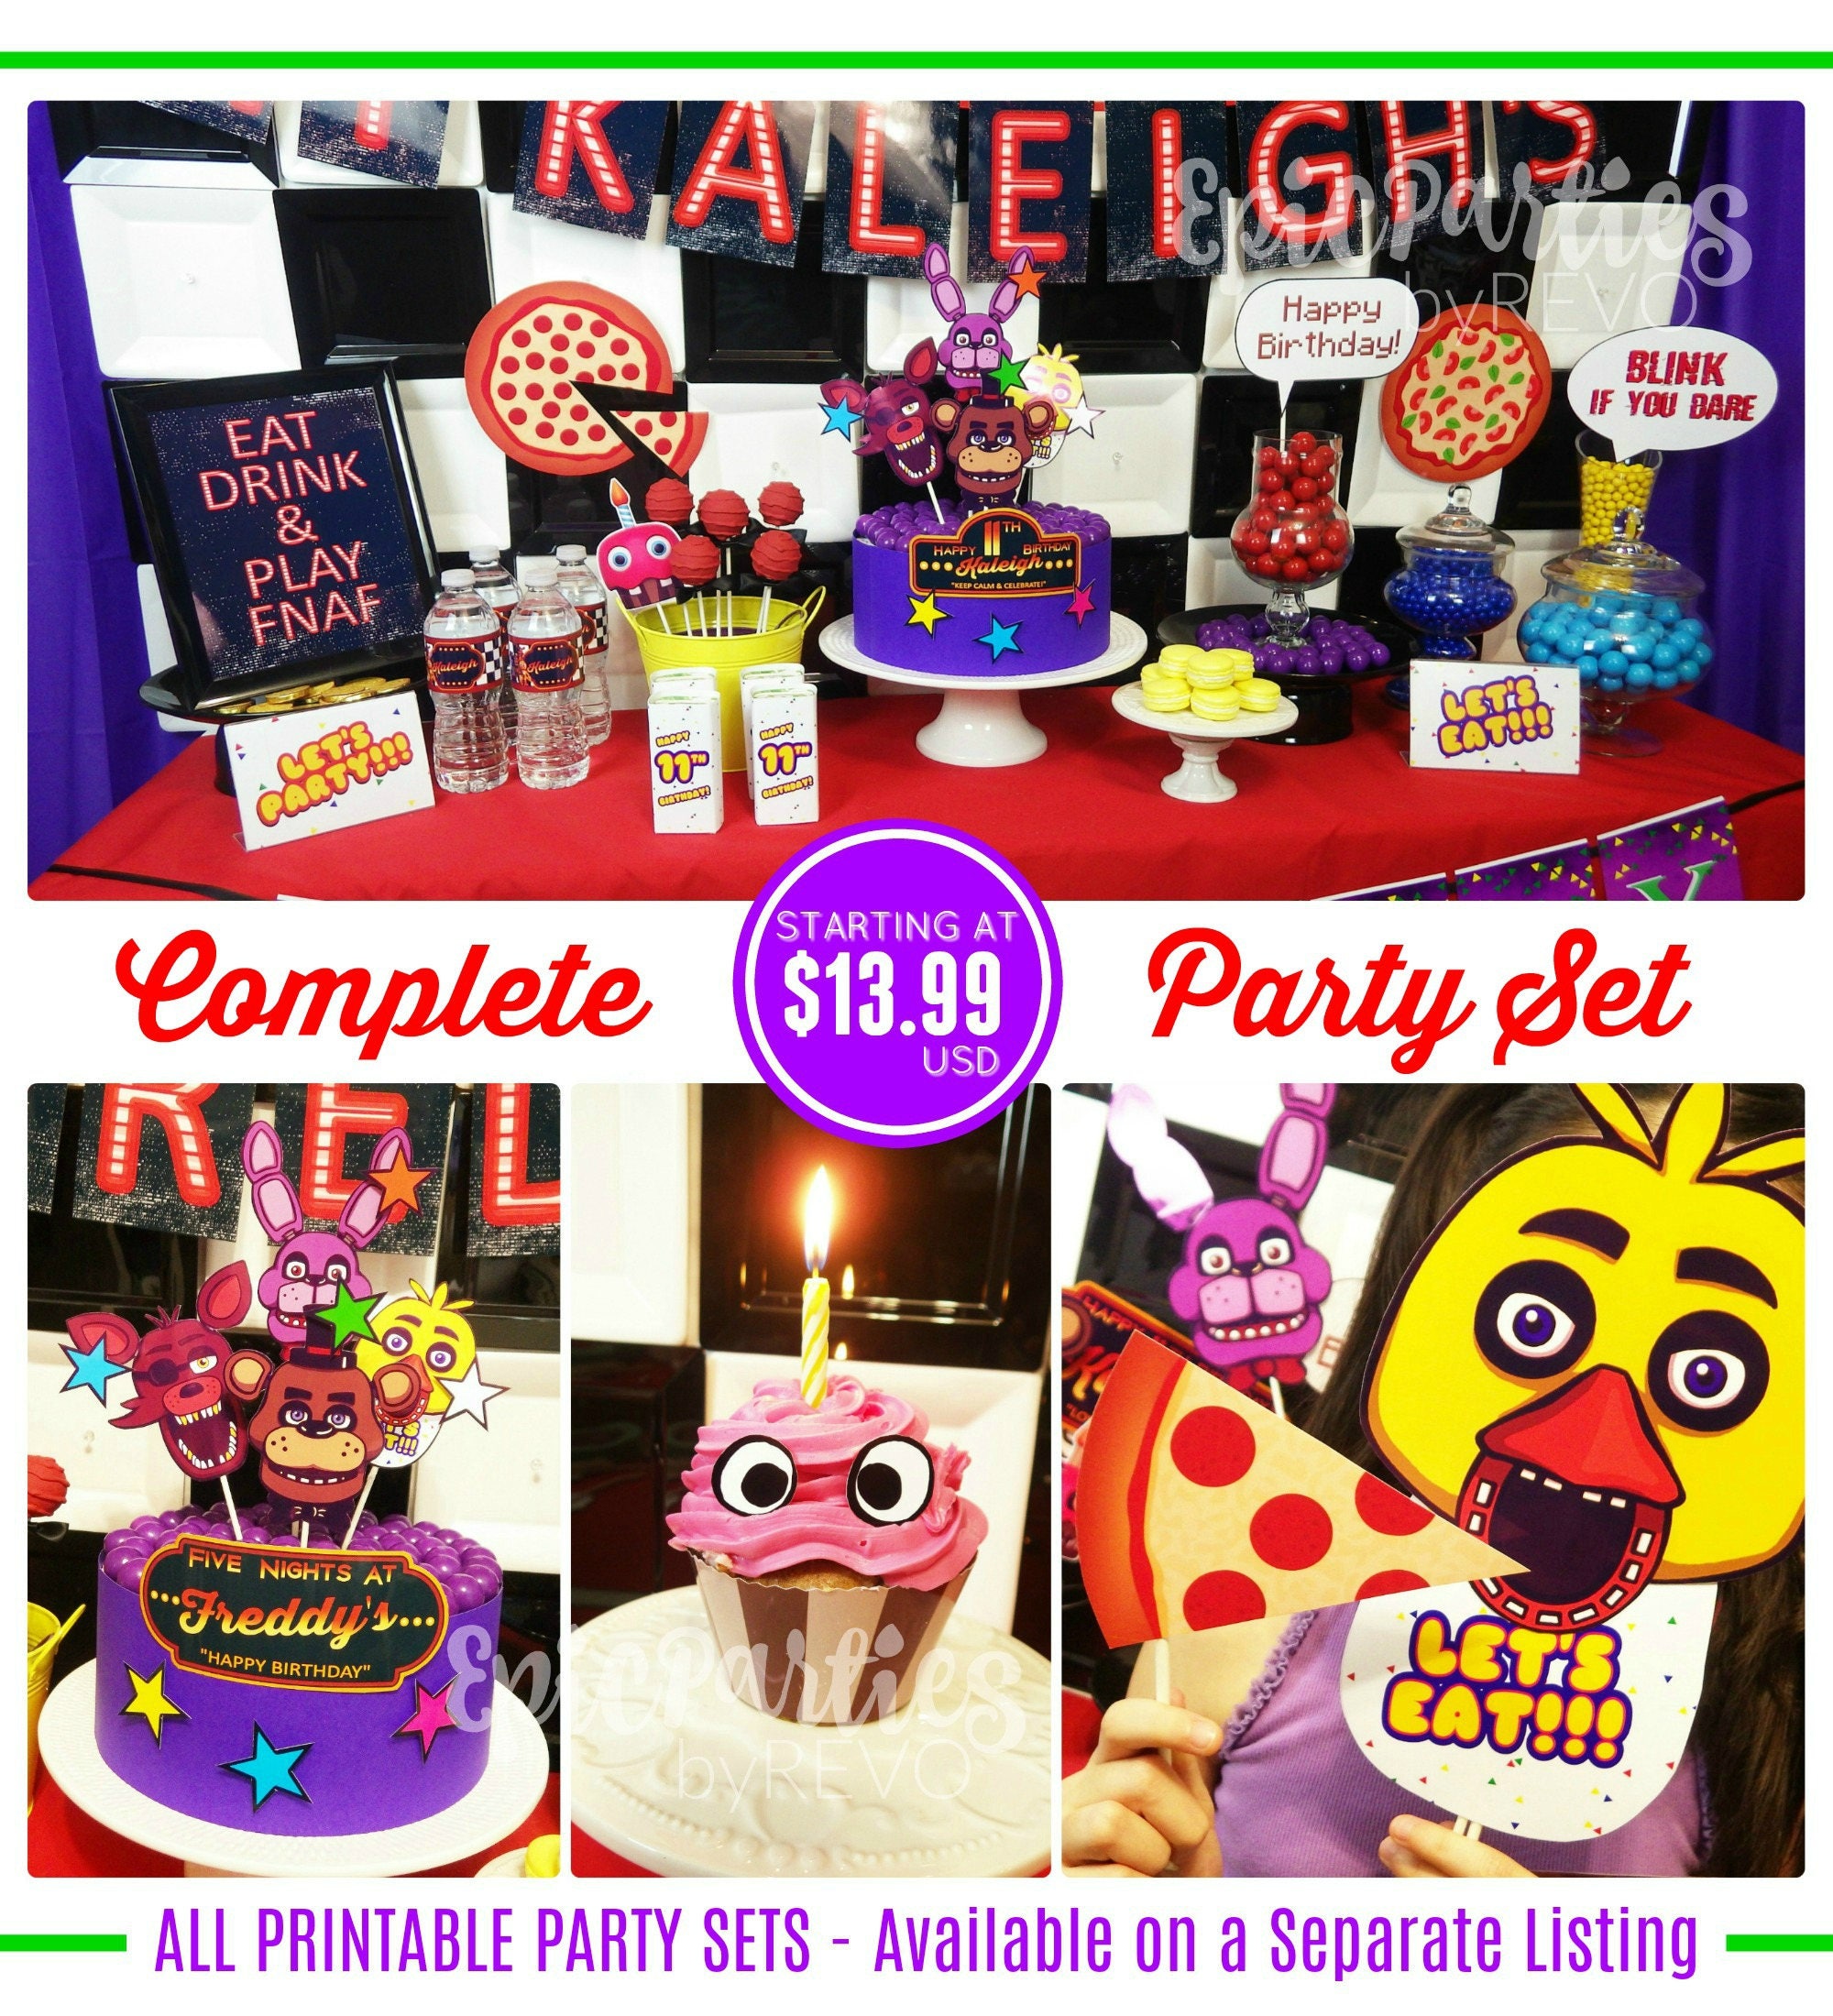 Five nights at freddy's Birthday Party Ideas, Photo 7 of 11